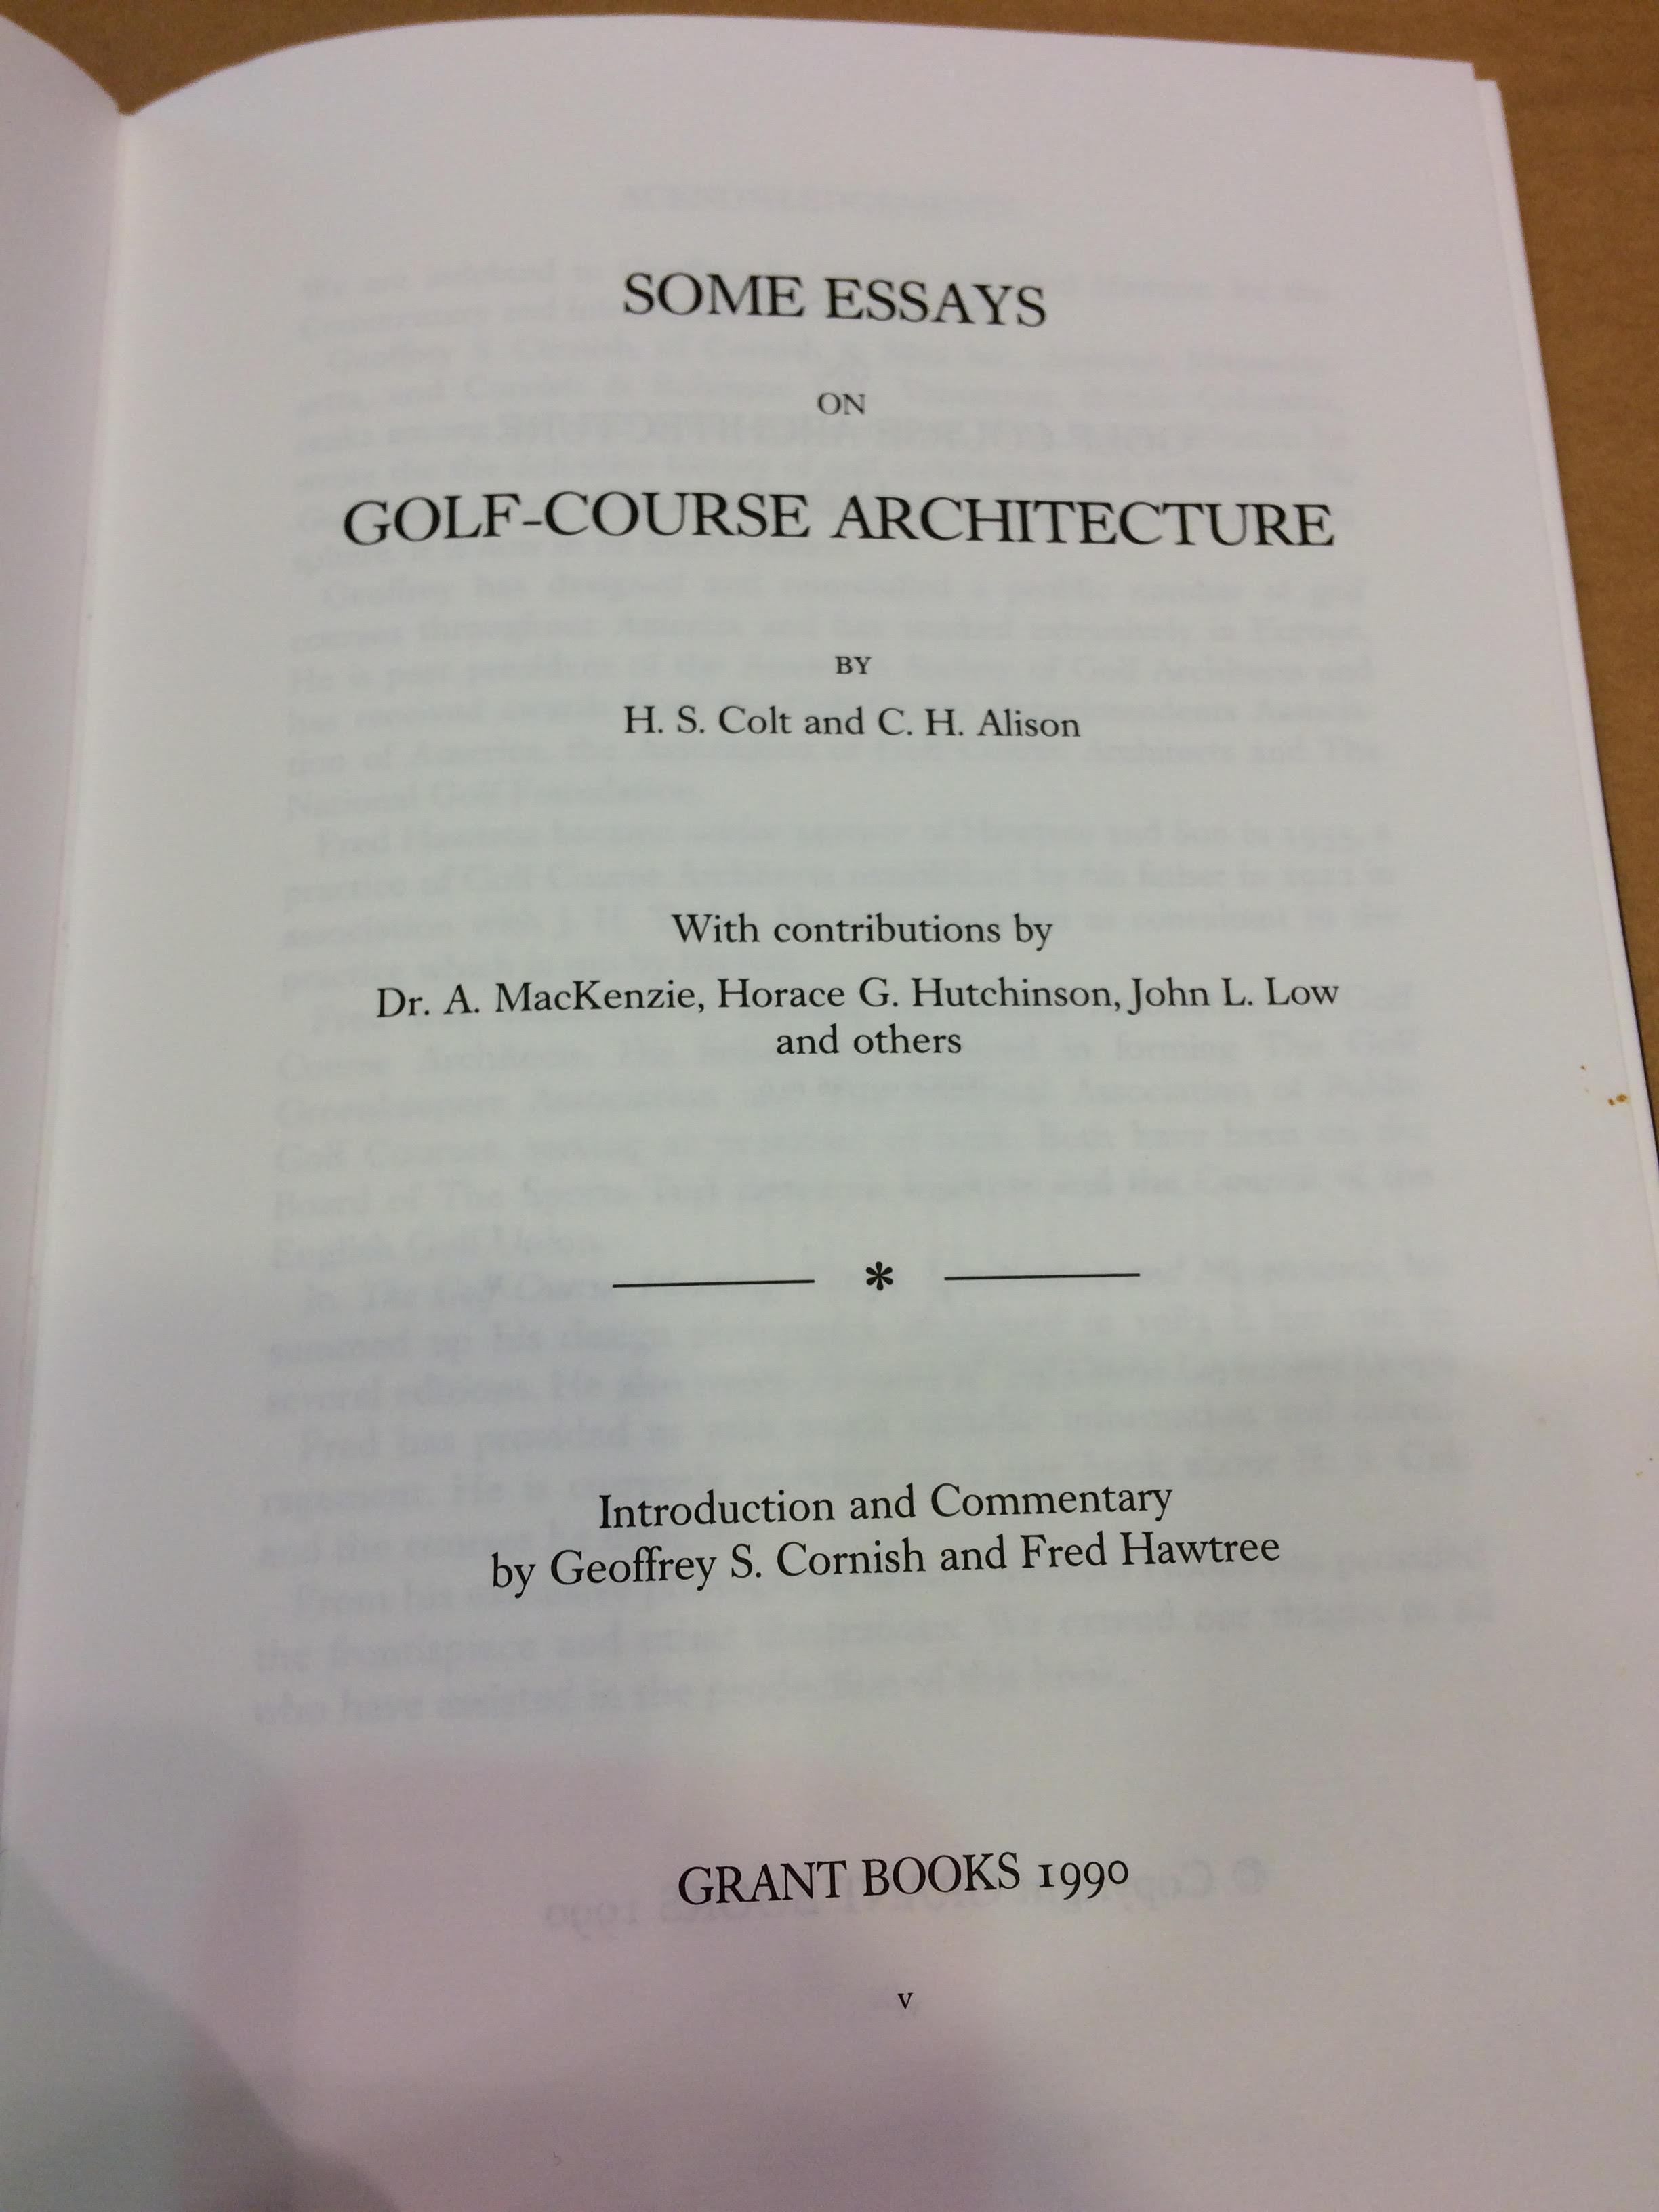 English Some Essays on Golf Architecture by H.S. Colt and C.H. Alison, Limited Edition